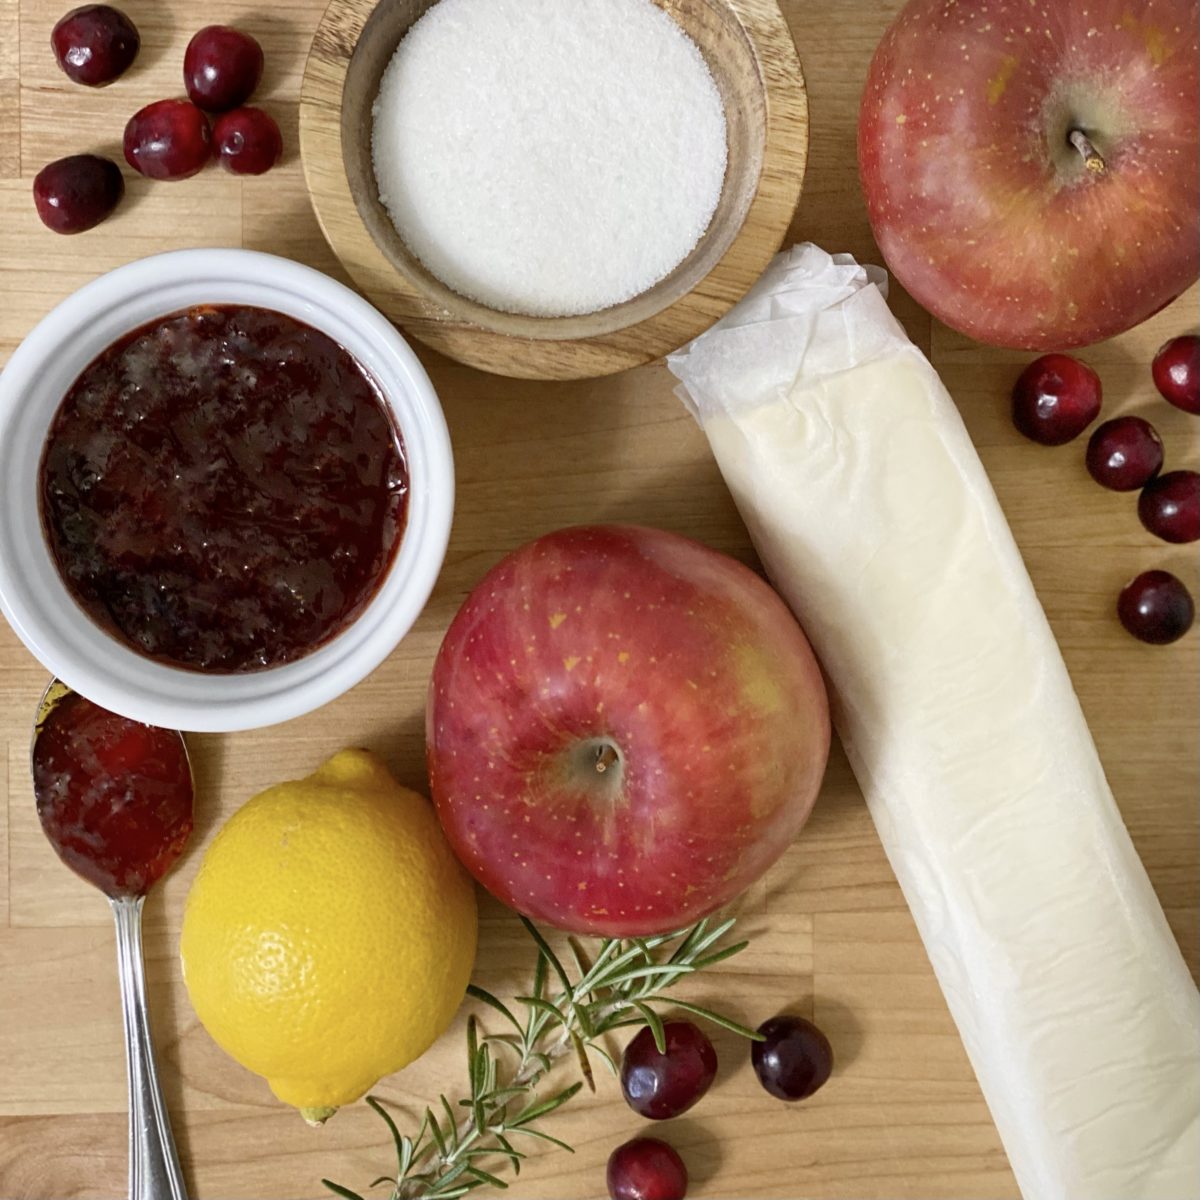 Ingredients to make baked apple roses including apples, puff pastry dough, lemon, strawberry jam, and sugar .